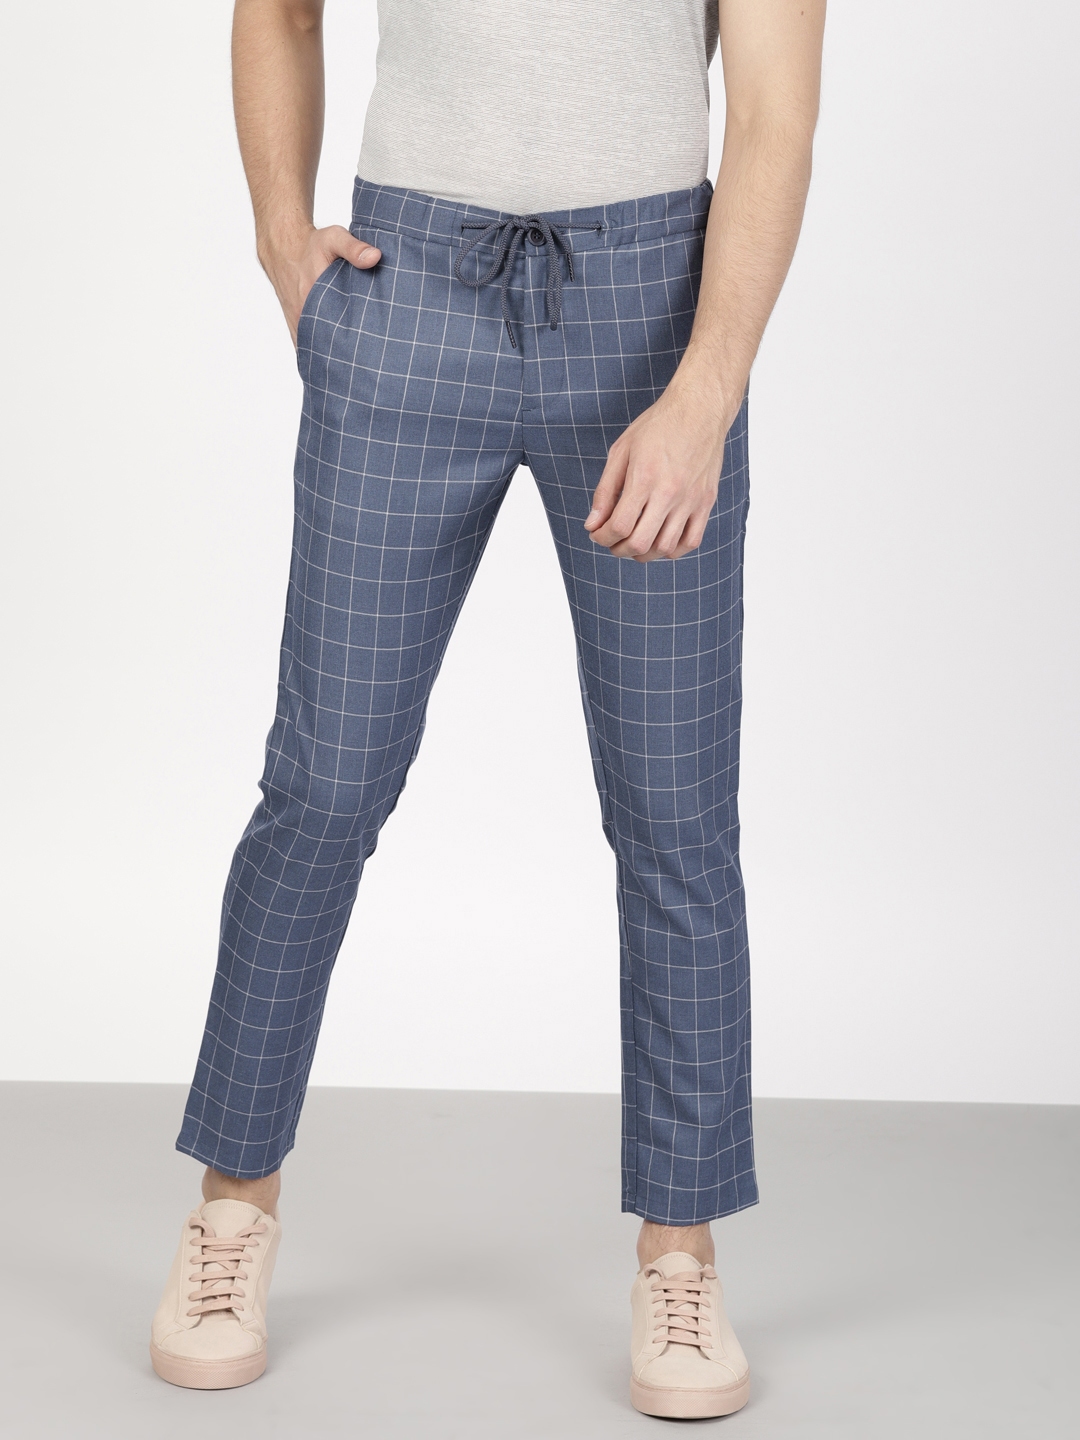 ZALORA WORK Women Black  Beige Cropped Tweed Checked Trousers Price in  India Full Specifications  Offers  DTashioncom